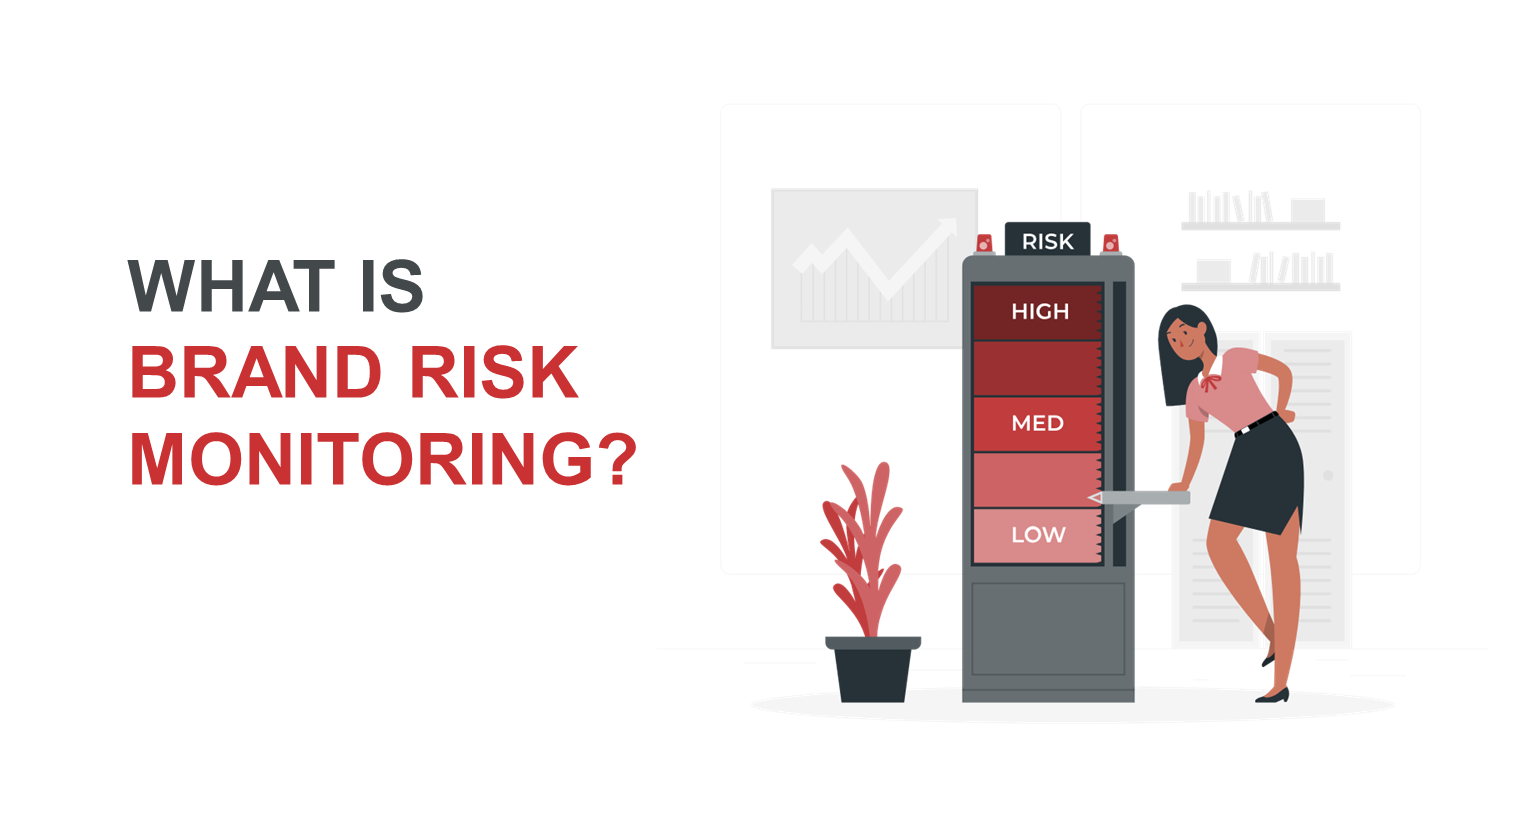 What is Brand Risk Monitoring?